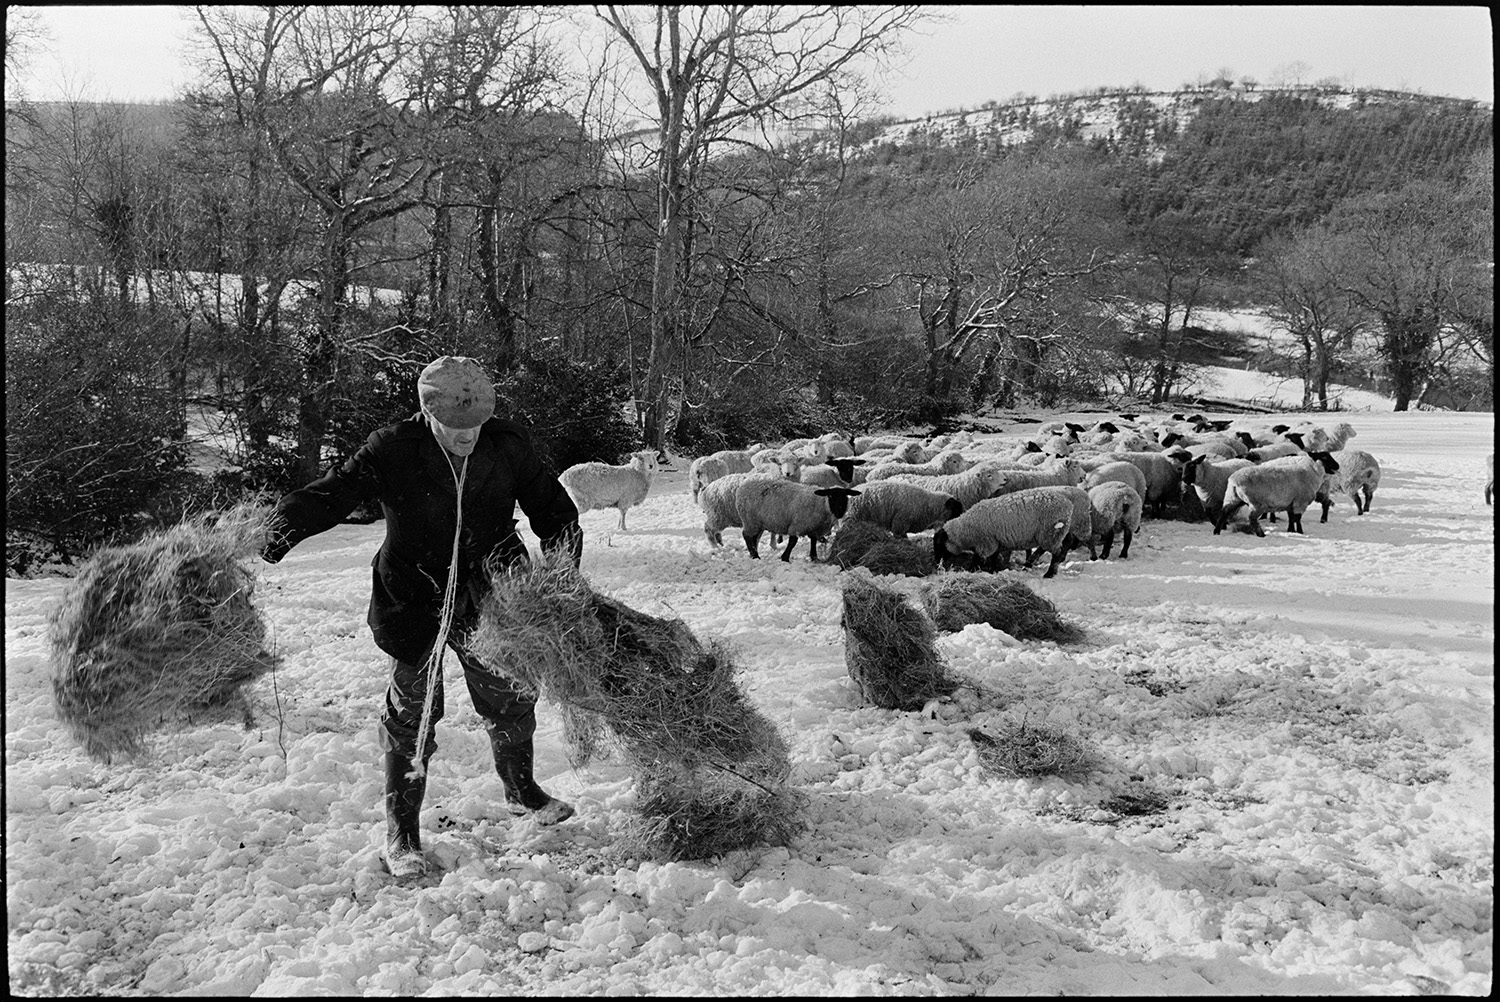 Snow, farmer feeding sheep with tractor and link box, carrying hay in wood, bright sun, snowdrift. 
[Alf Pugsley scattering hay for sheep in a snow covered field at Lower Lanham, Dolton. Woodland can be seen in the background.]